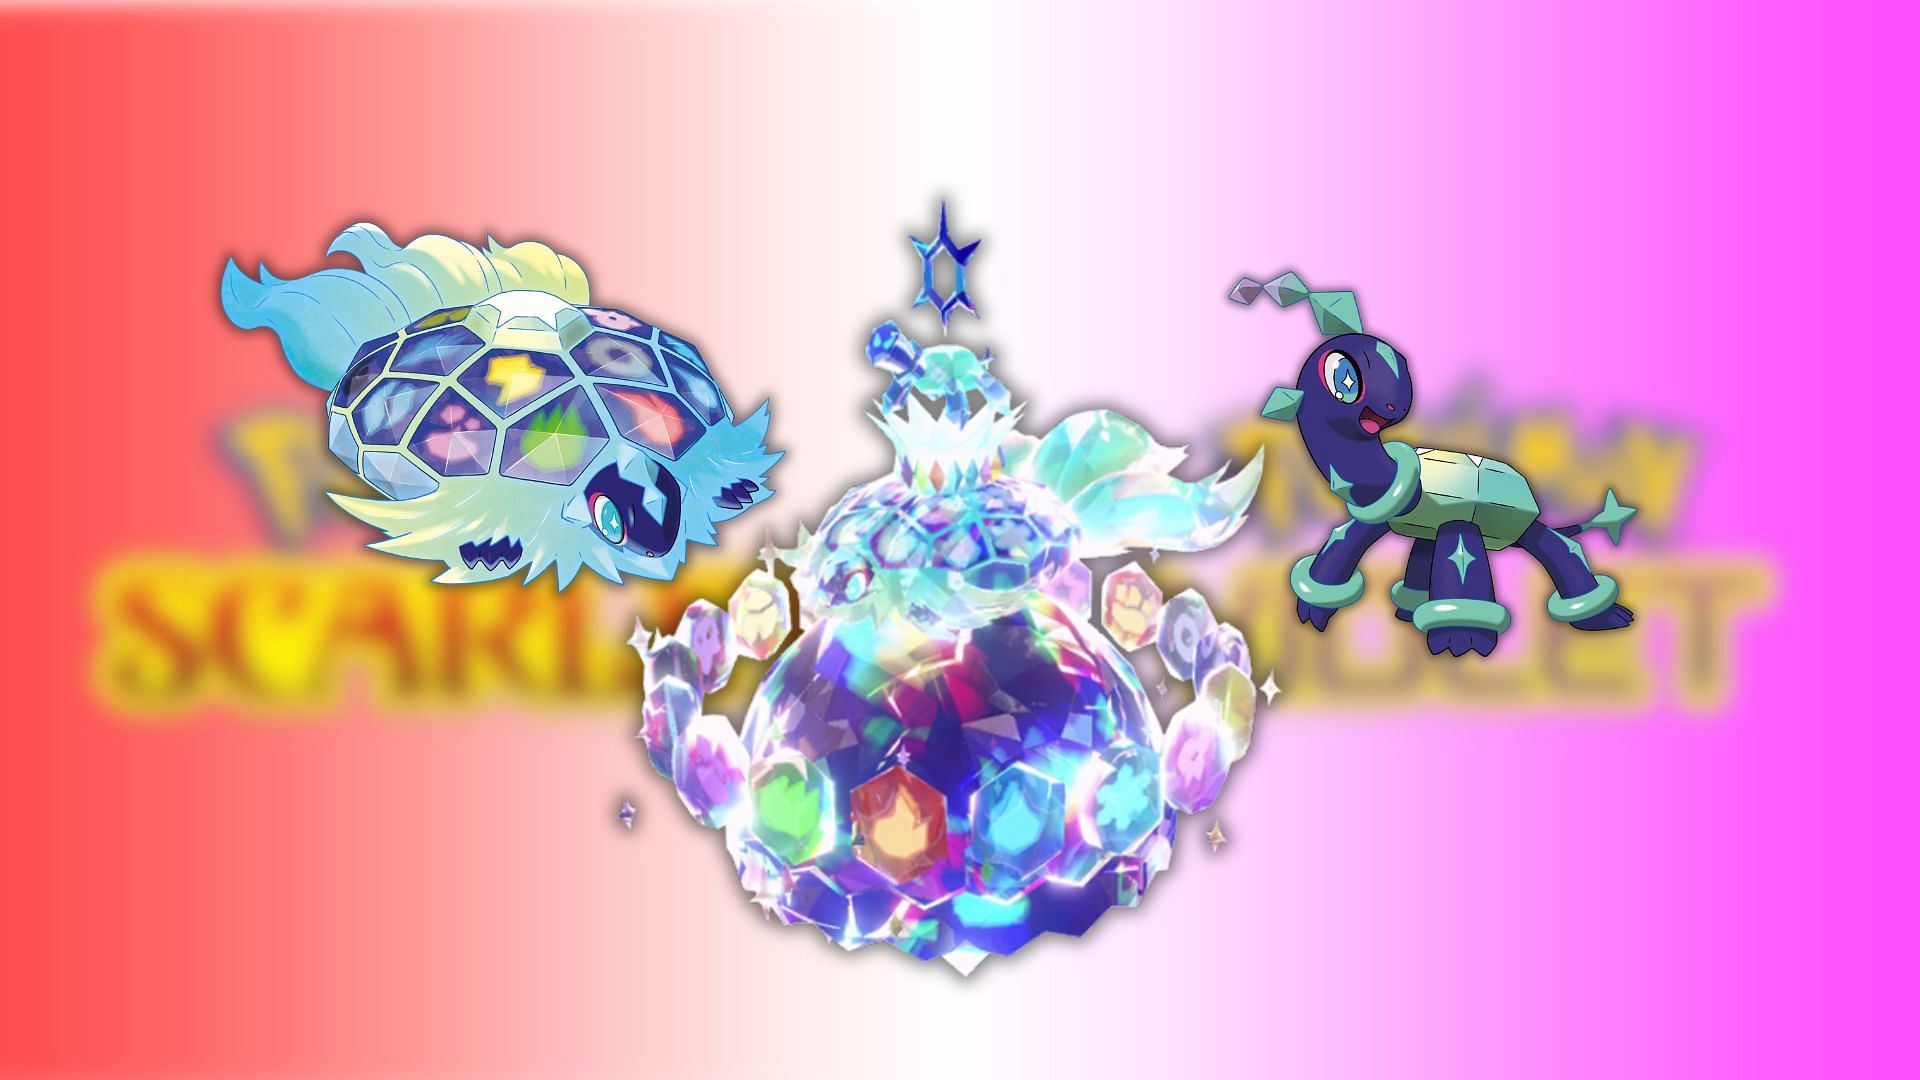 Indigo Disk final boss and ending explained in Pokemon Scarlet and Violet